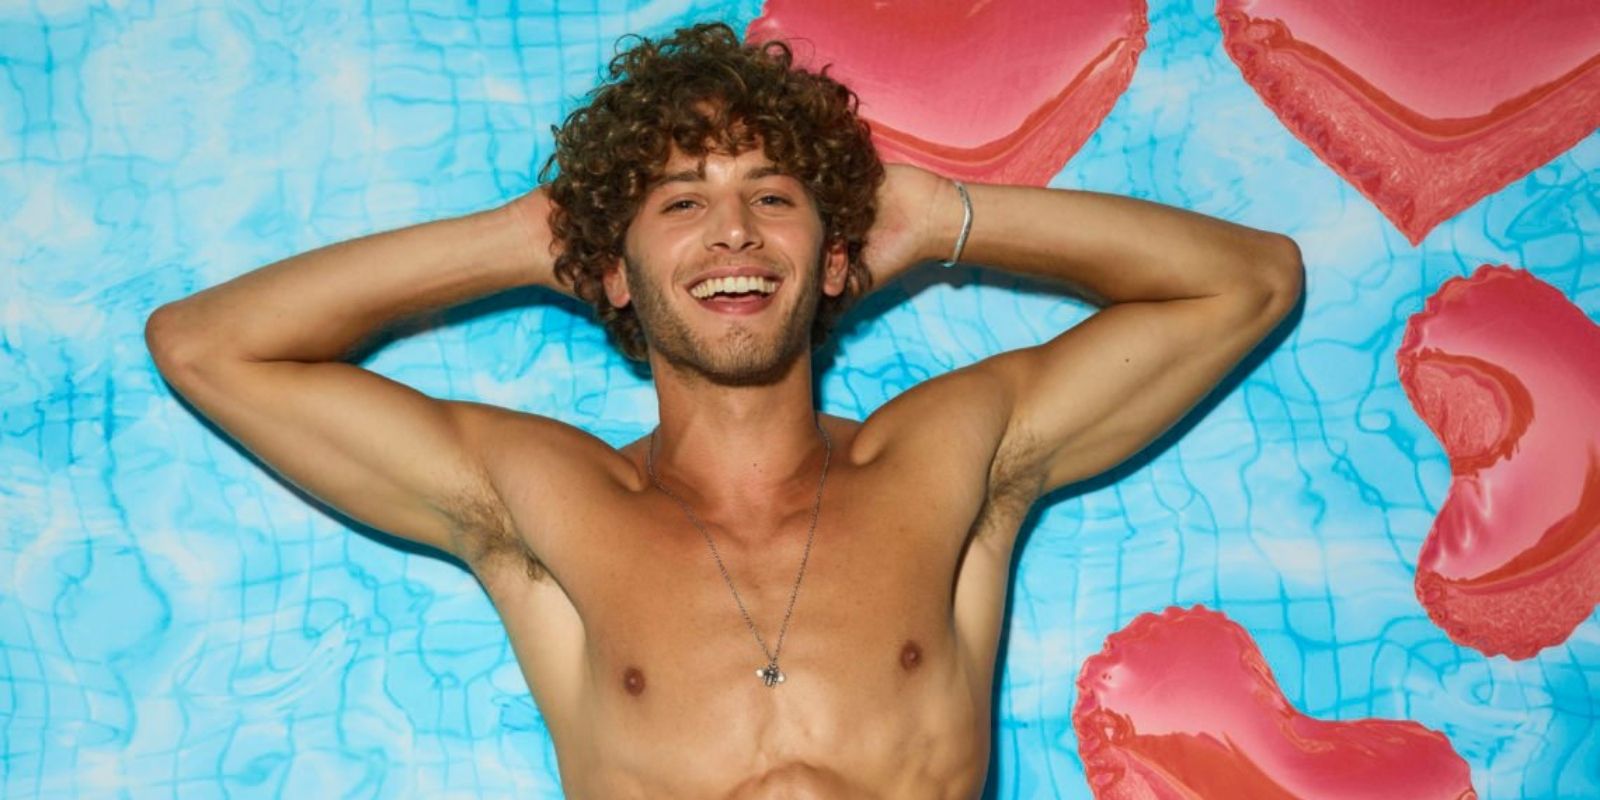 Love Island Eyal Booker floating in a pool with heart floats